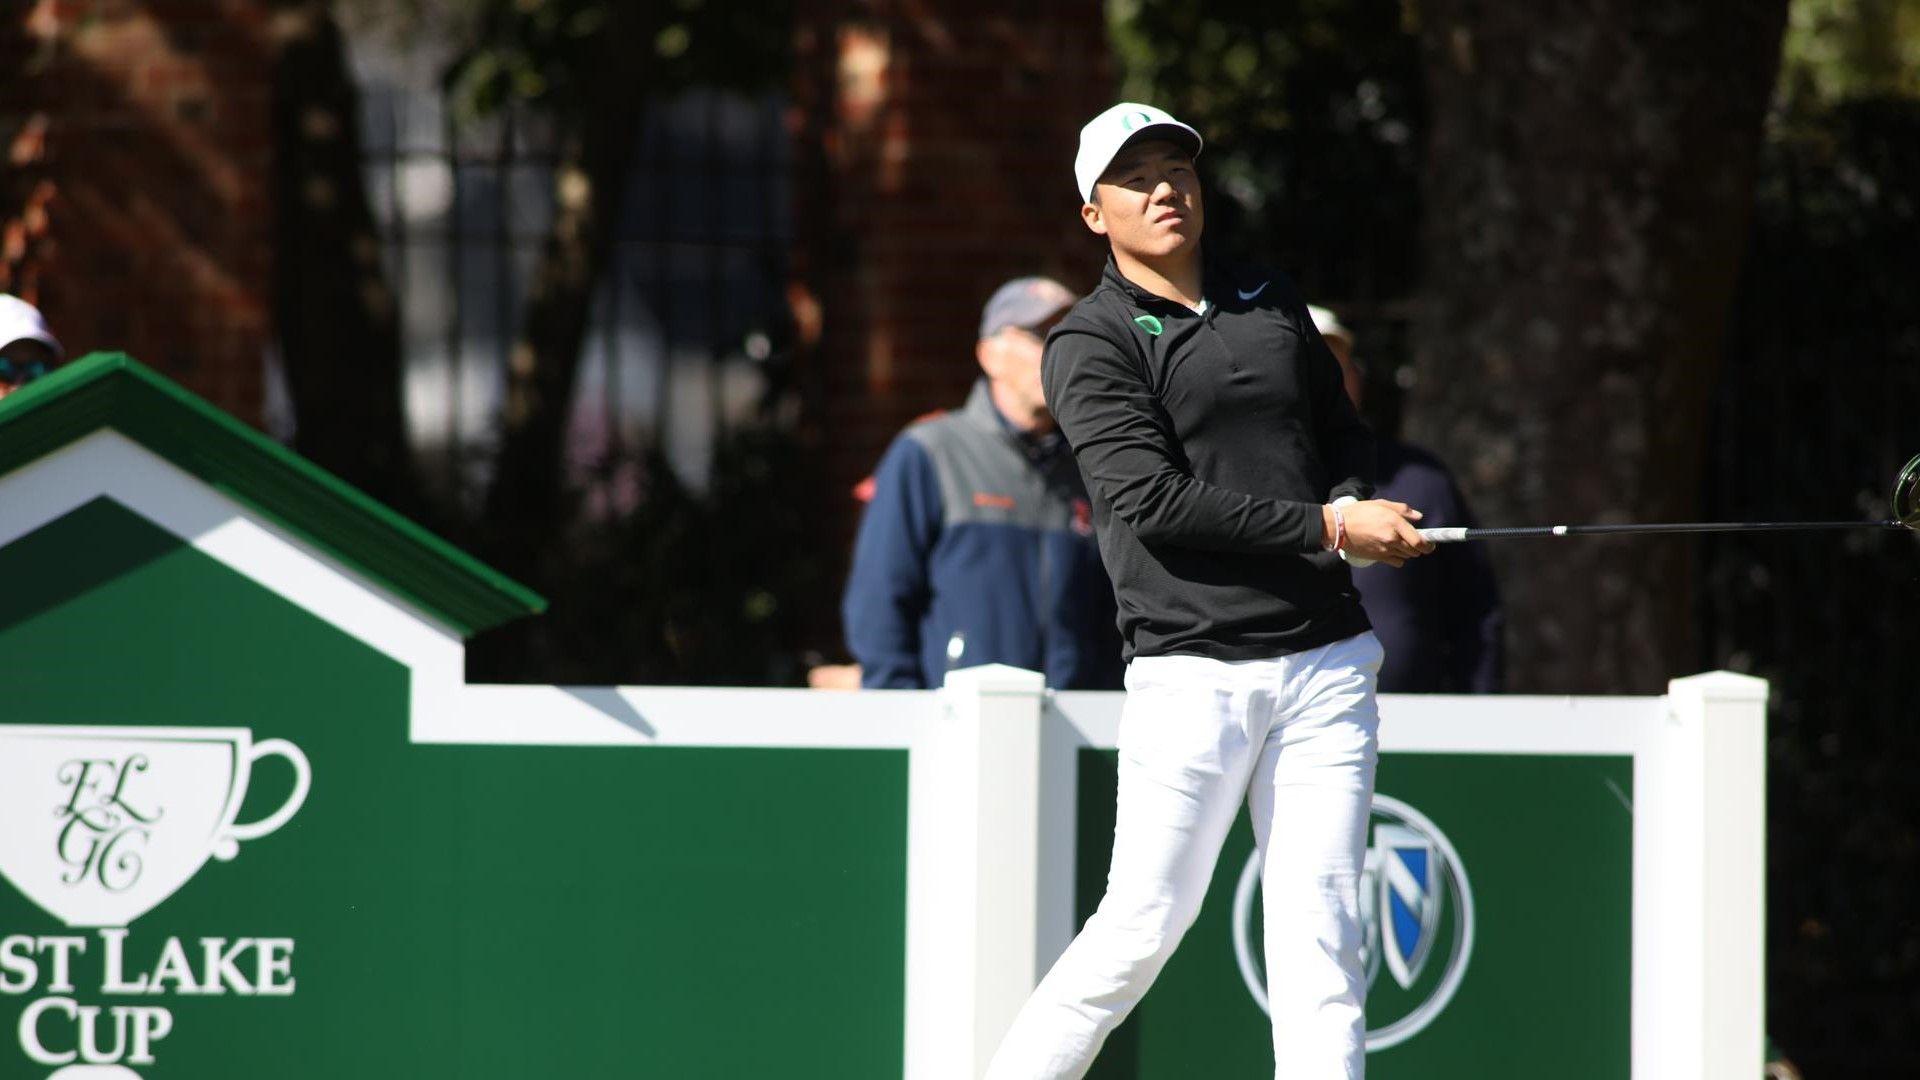 Xiong to play in Farmers Insurance Open.com